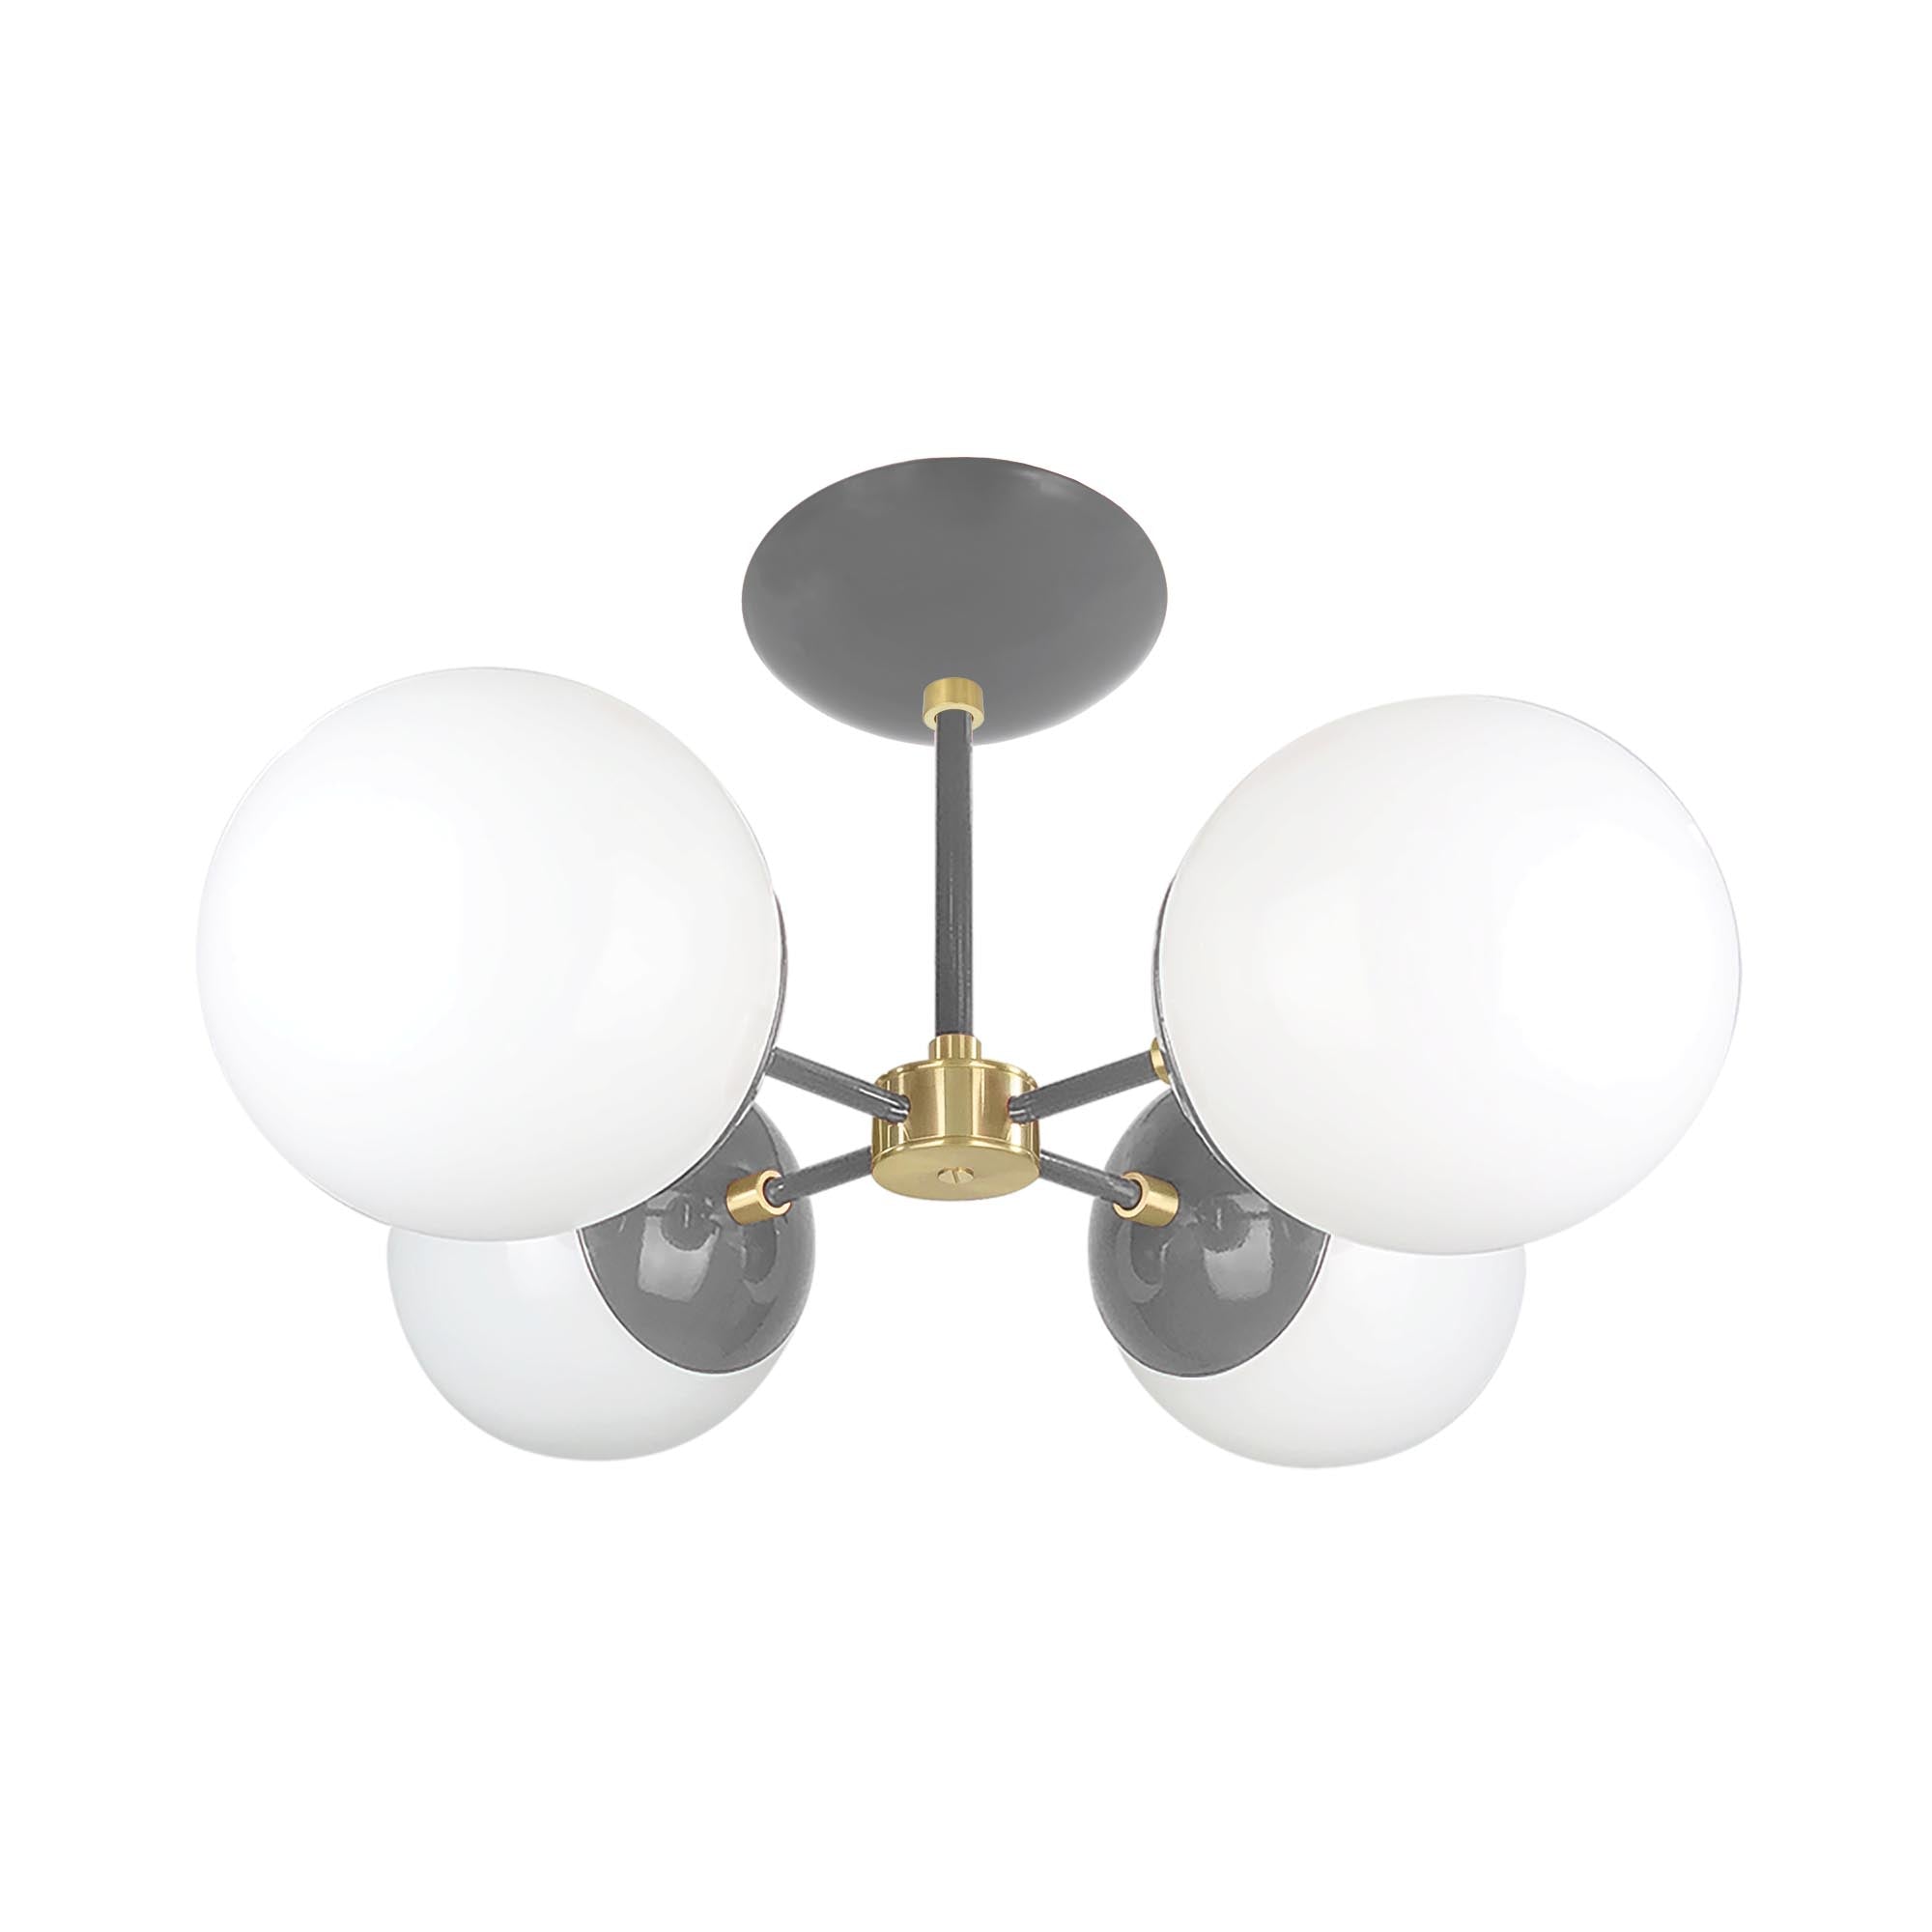 Brass and charcoal color Orbi flush mount Dutton Brown lighting